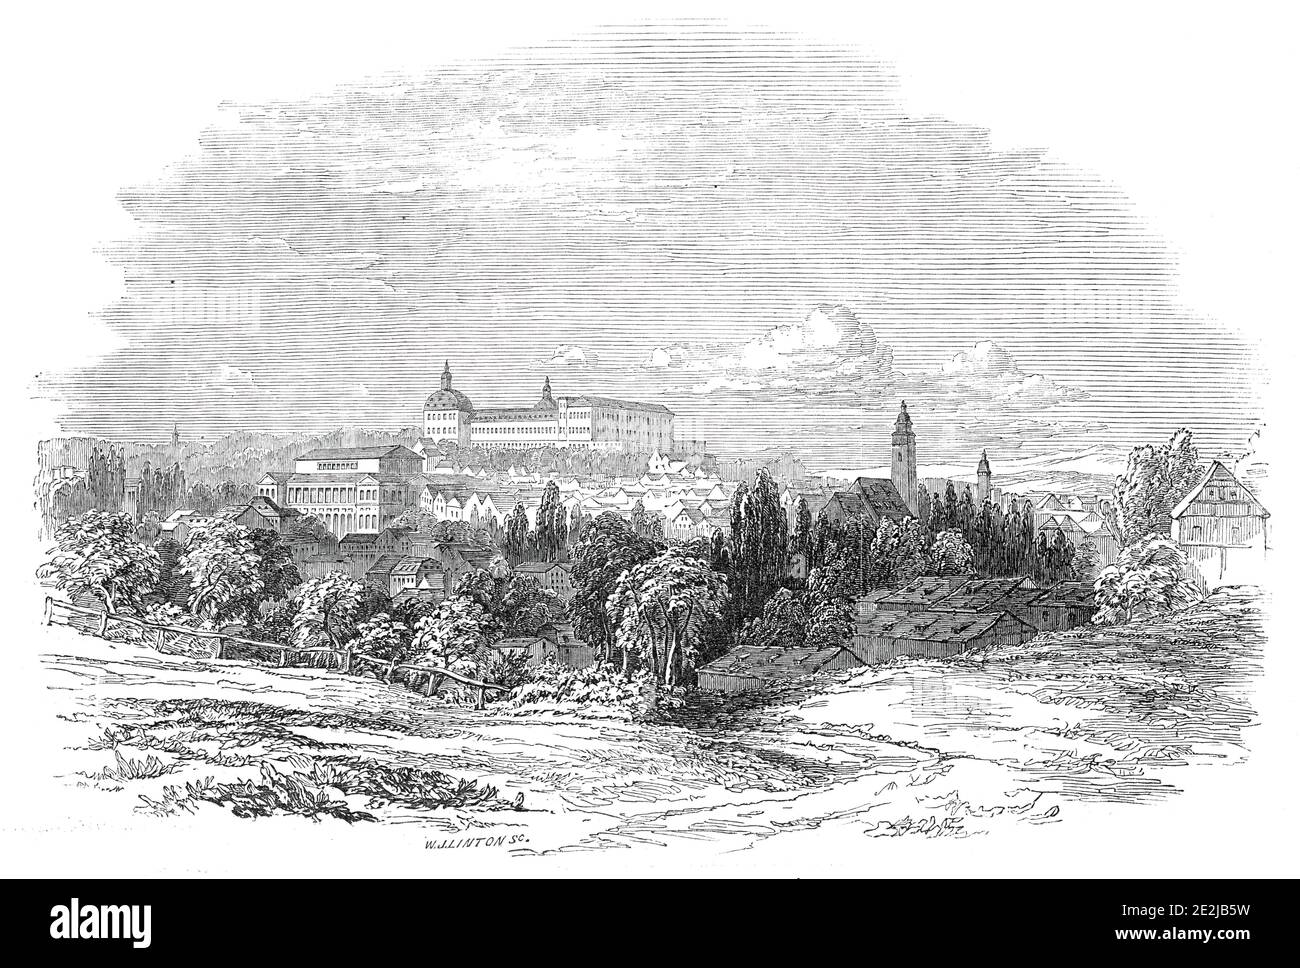 Gotha - from His Royal Highness Prince Albert's drawing, 1845. View of the town of Gotha in Thuringia, Germany, seat of the royal house of Wettin of which Prince Albert was a member. Above the town is the Friedenstein Palace, residence of the dukes of Saxe-Gotha. From &quot;Illustrated London News&quot;, 1845, Vol VII. Stock Photo